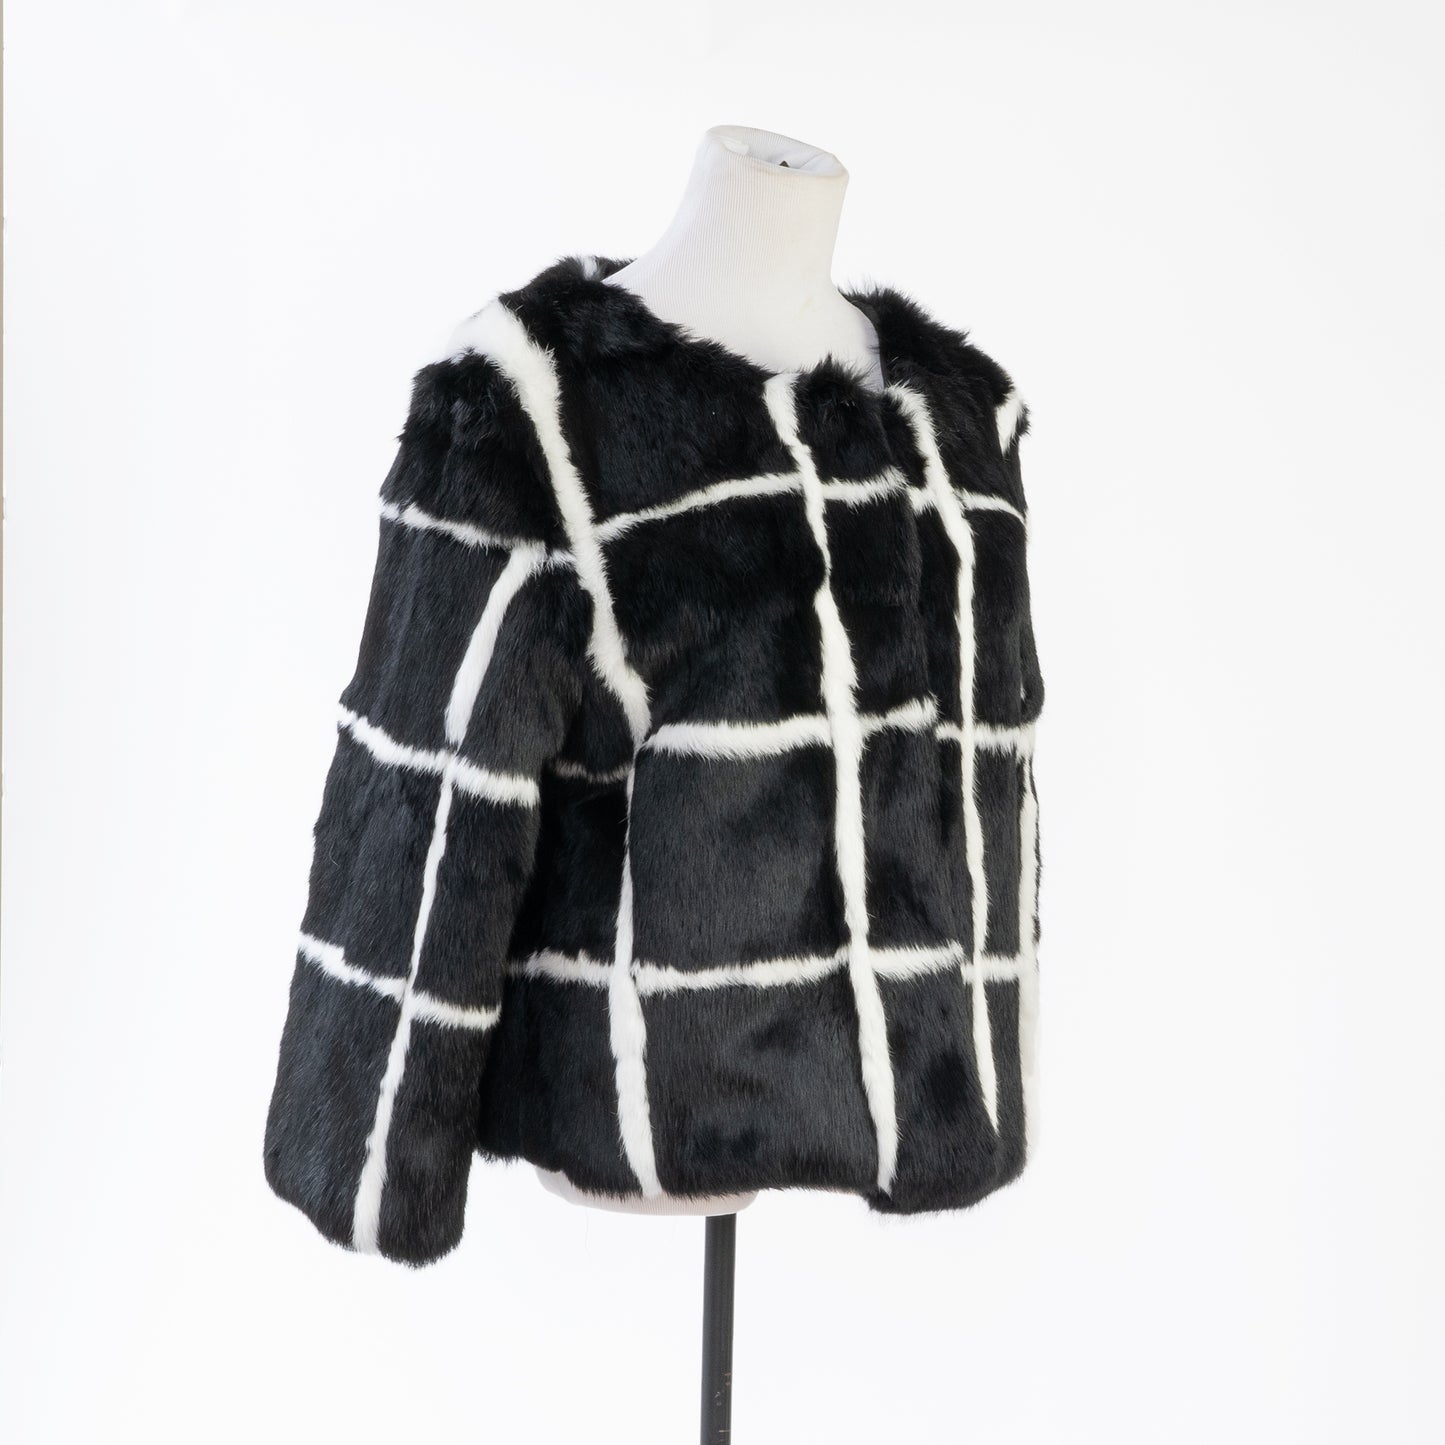 side view of a black and white rabbit fur coat